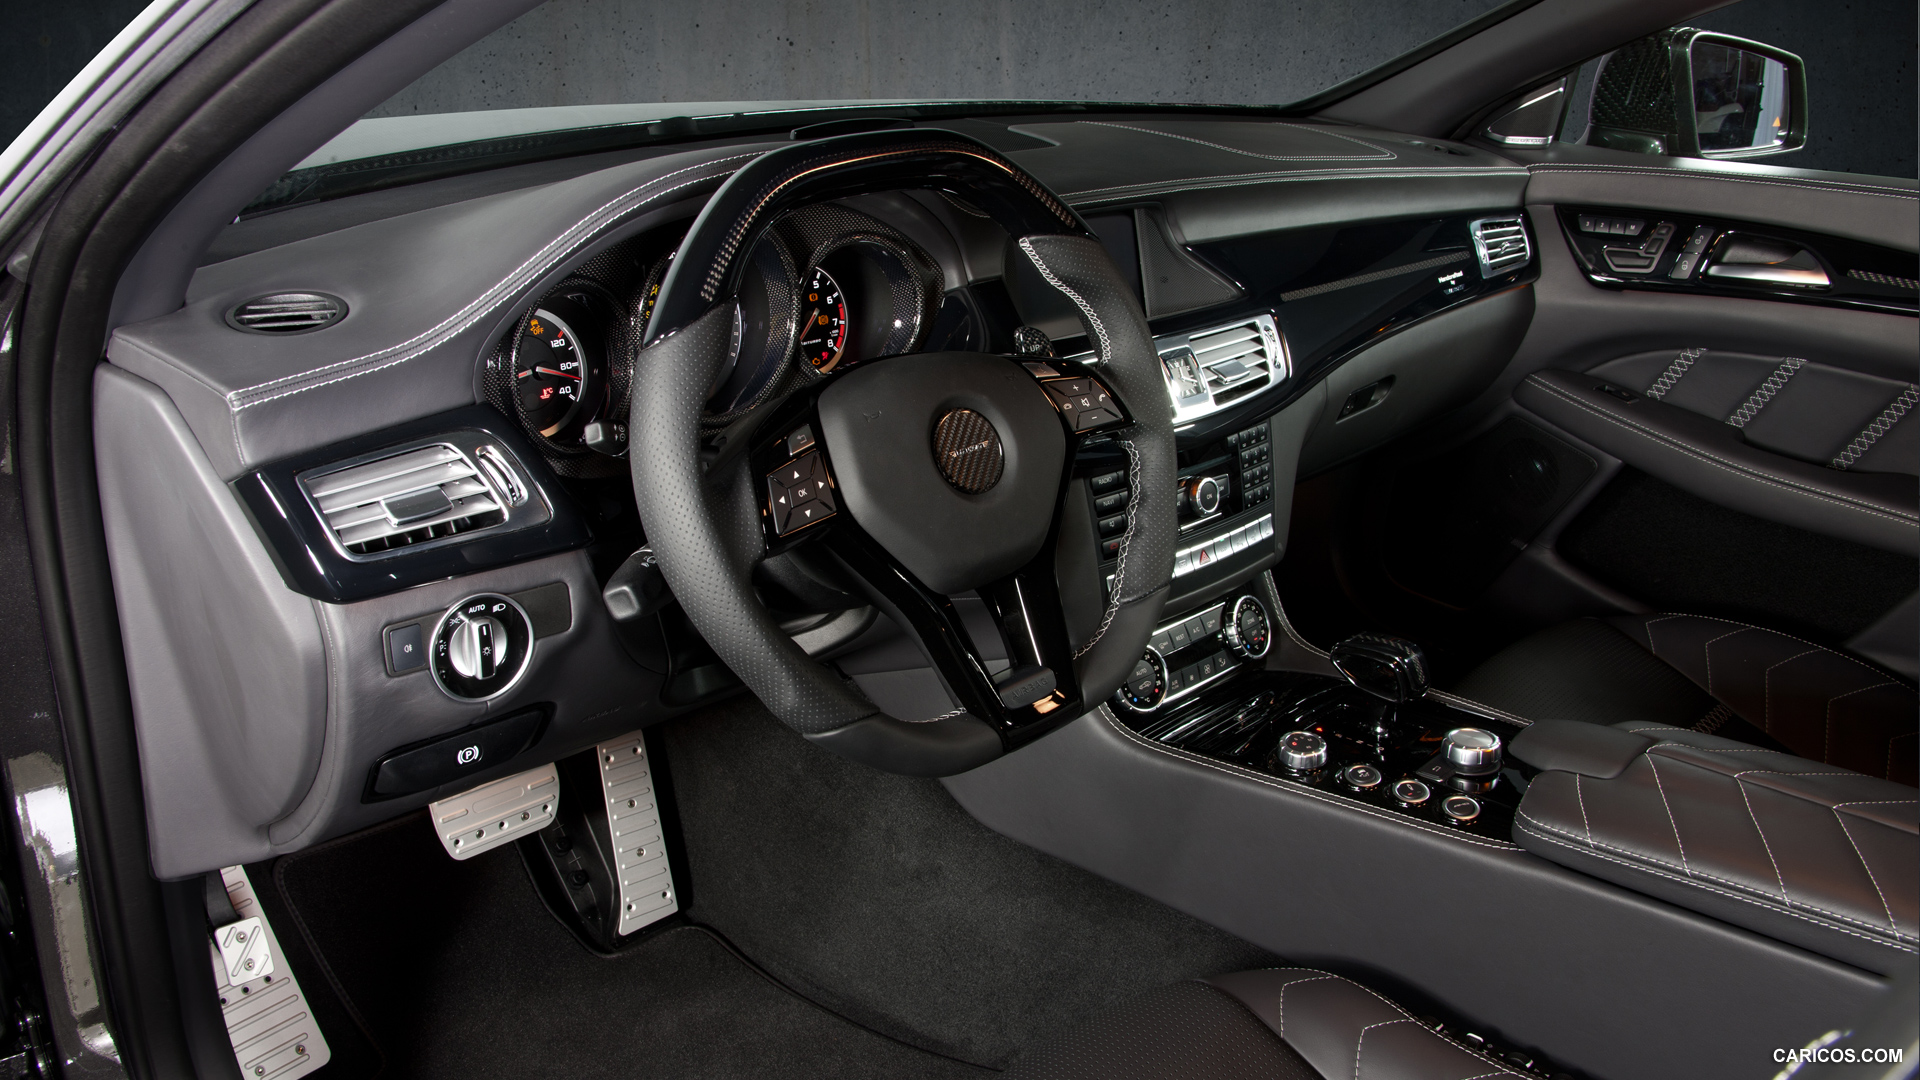 2012 Mansory Mercedes-Benz CLS63 AMG  - Interior, #5 of 5